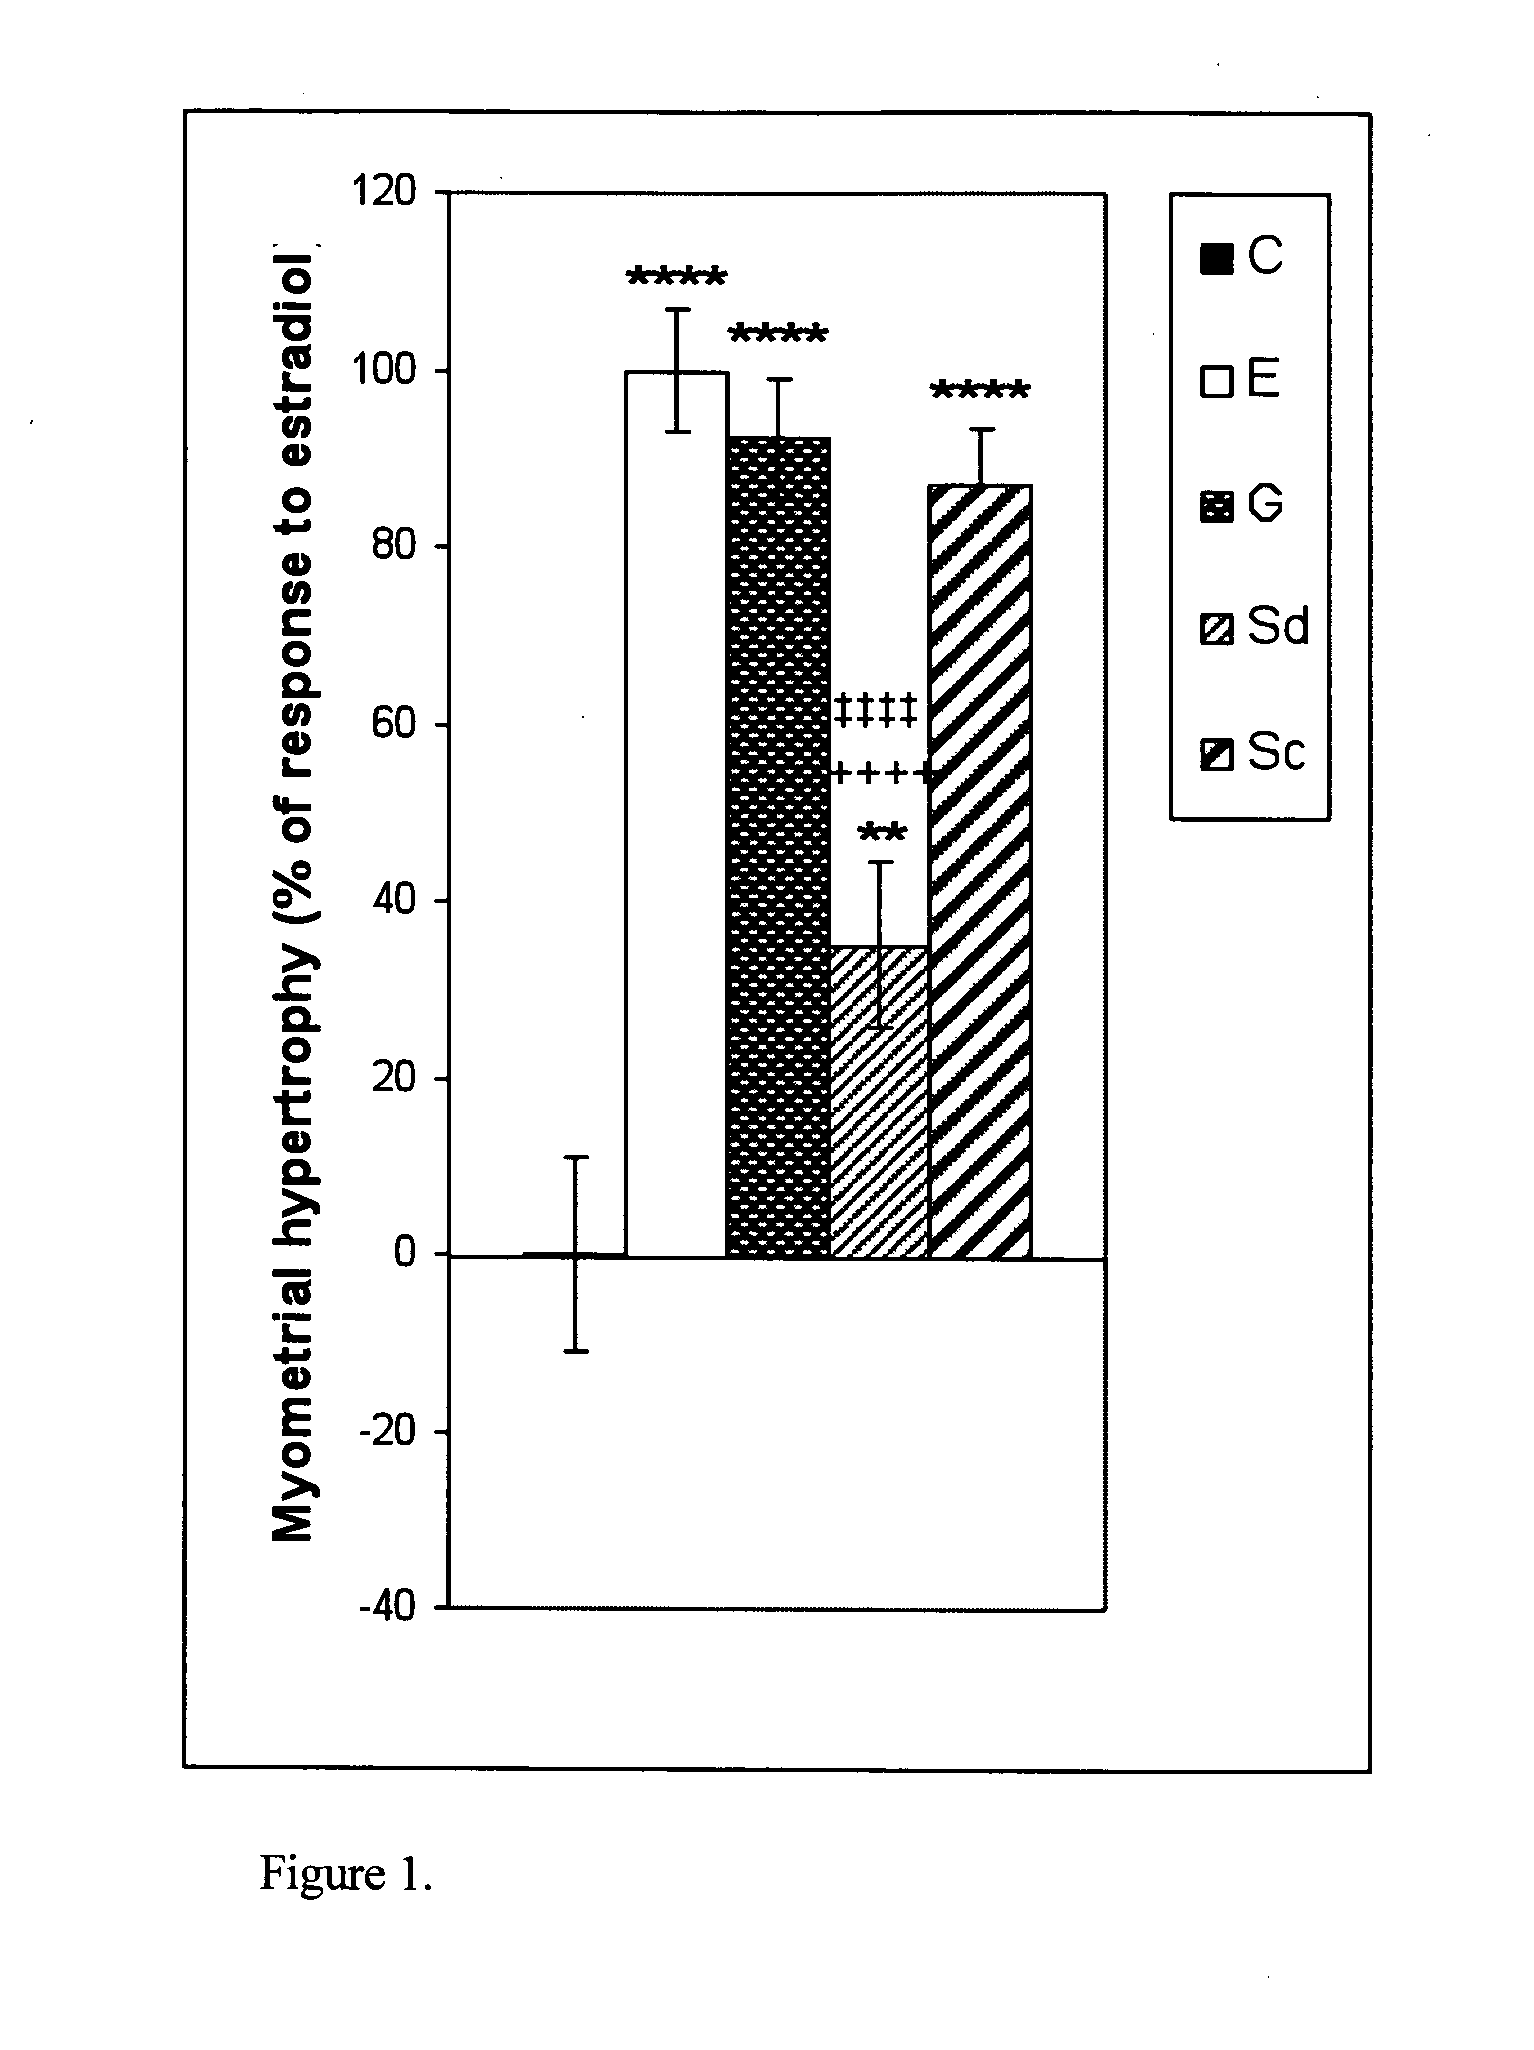 Pharmaceutical product and analysis model for hormone replacement therapy for women and prevention of some cancers and uterine myomas